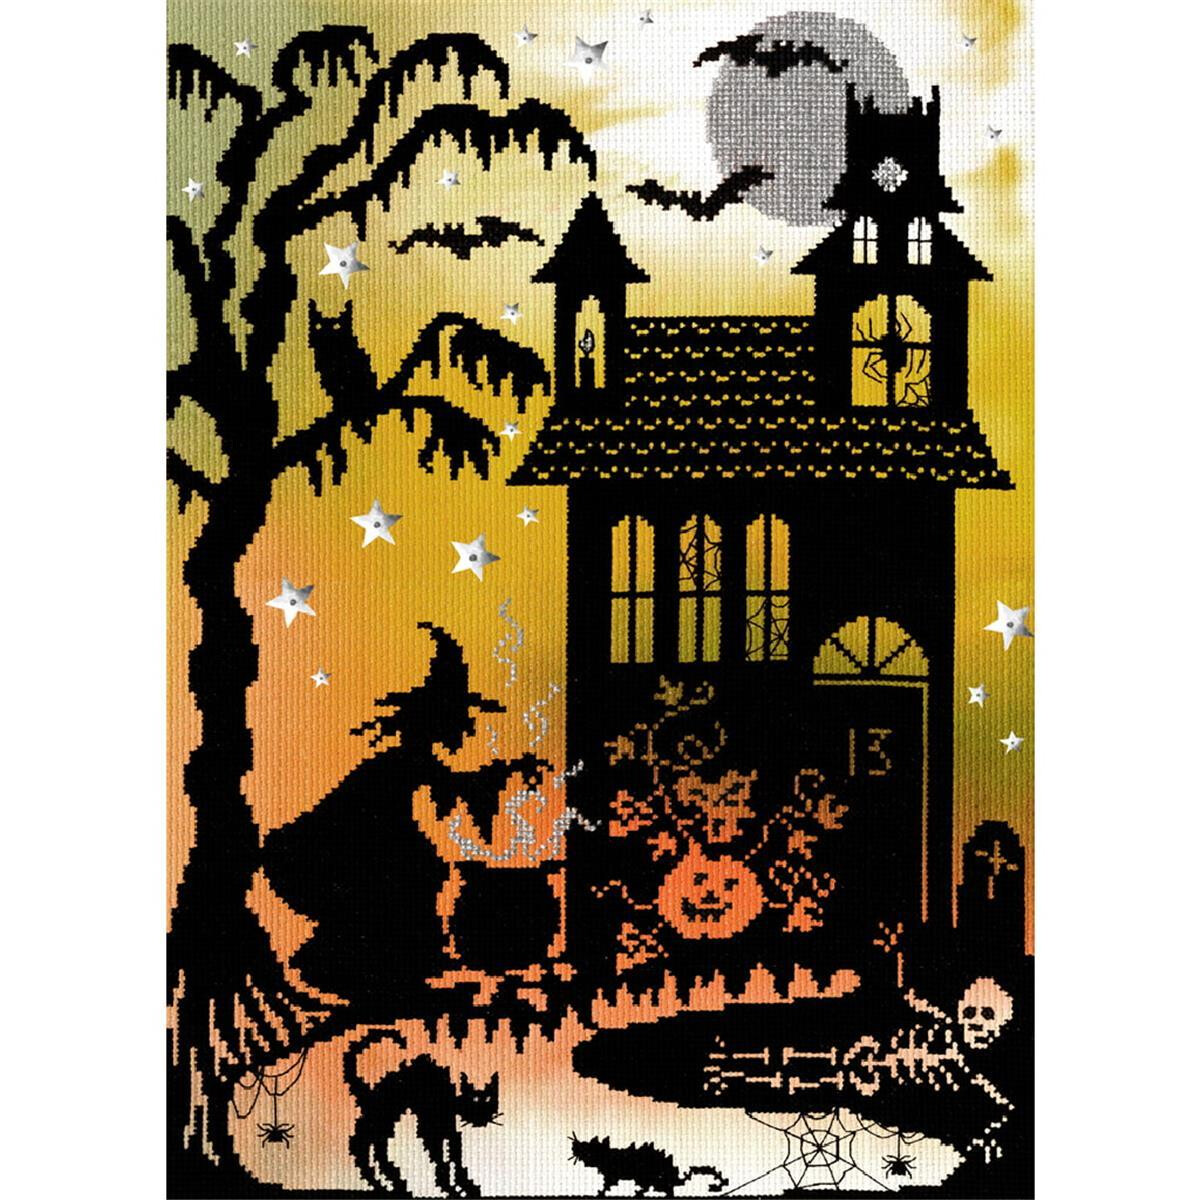 A spooky Halloween tapestry, made in cross-stitch, shows...